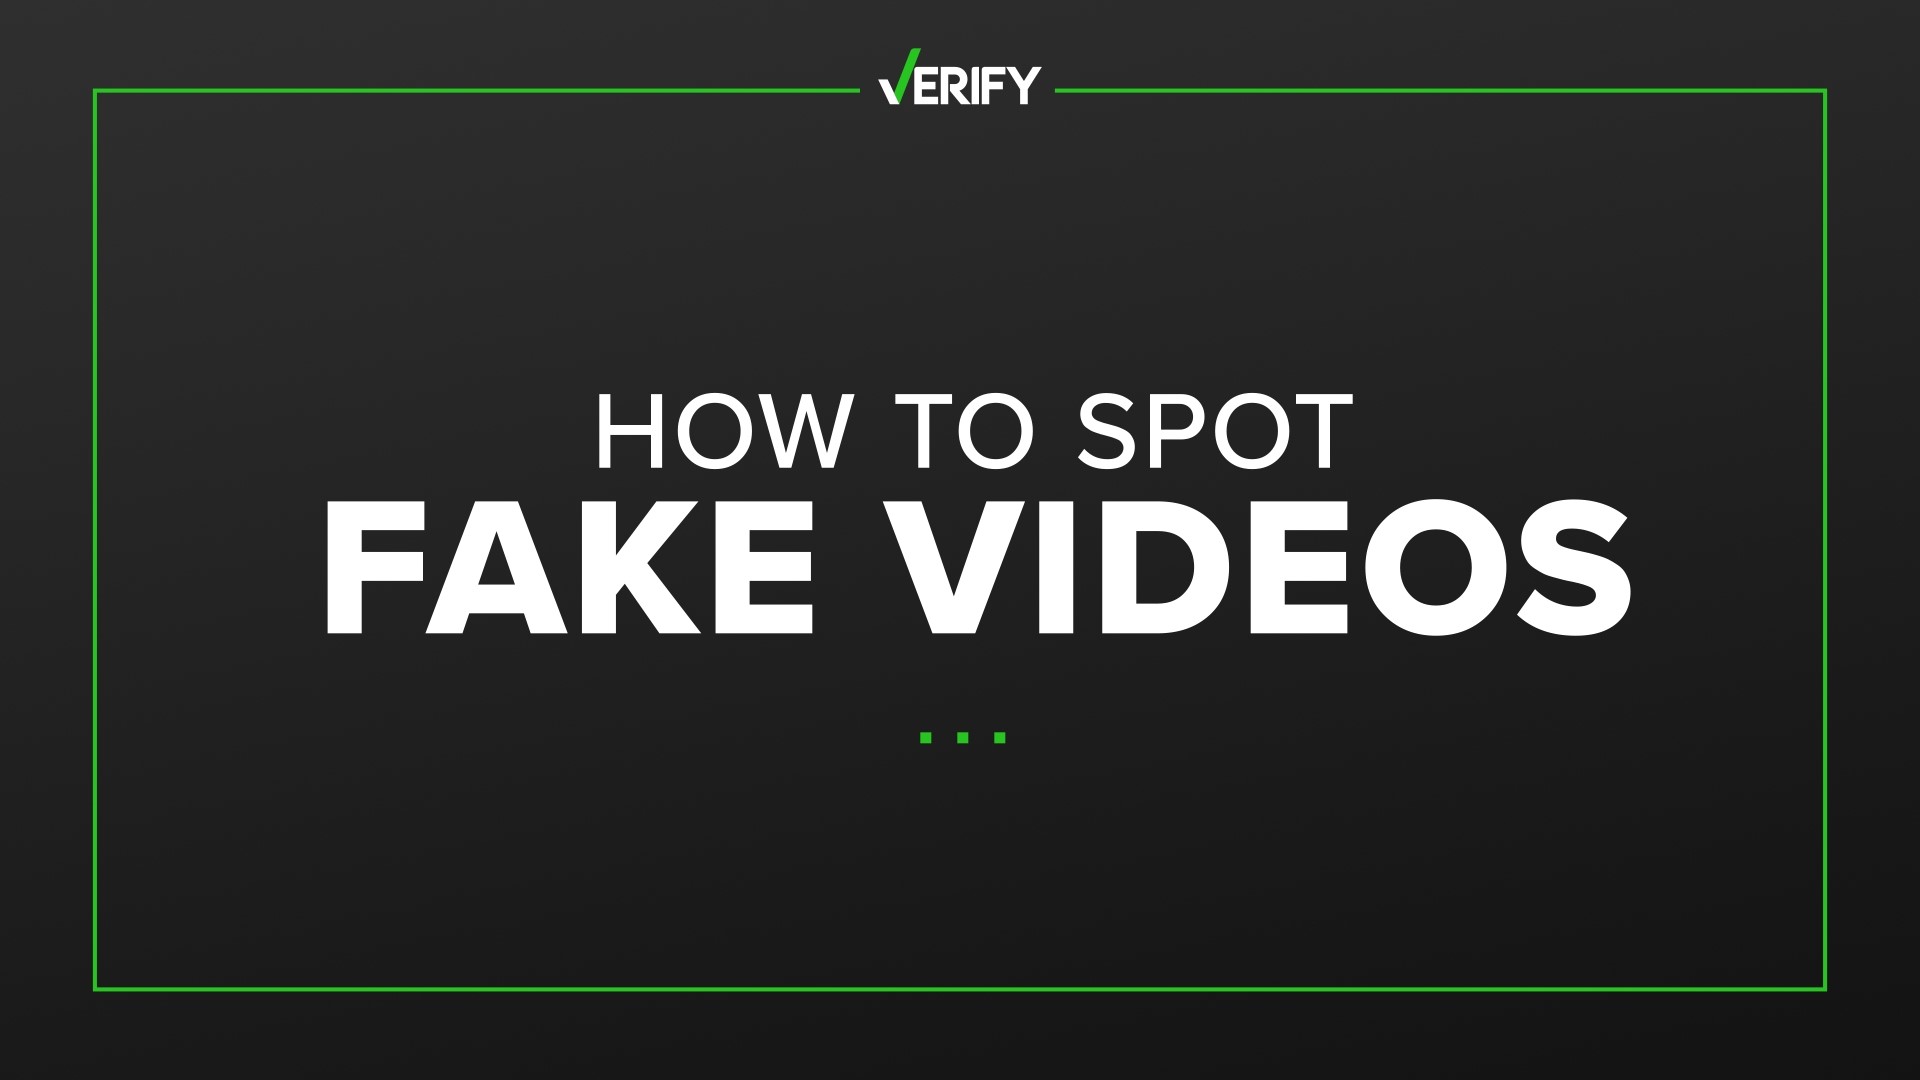 The VERIFY team shows how to spot a fake video using four things, movement, background, source and context.